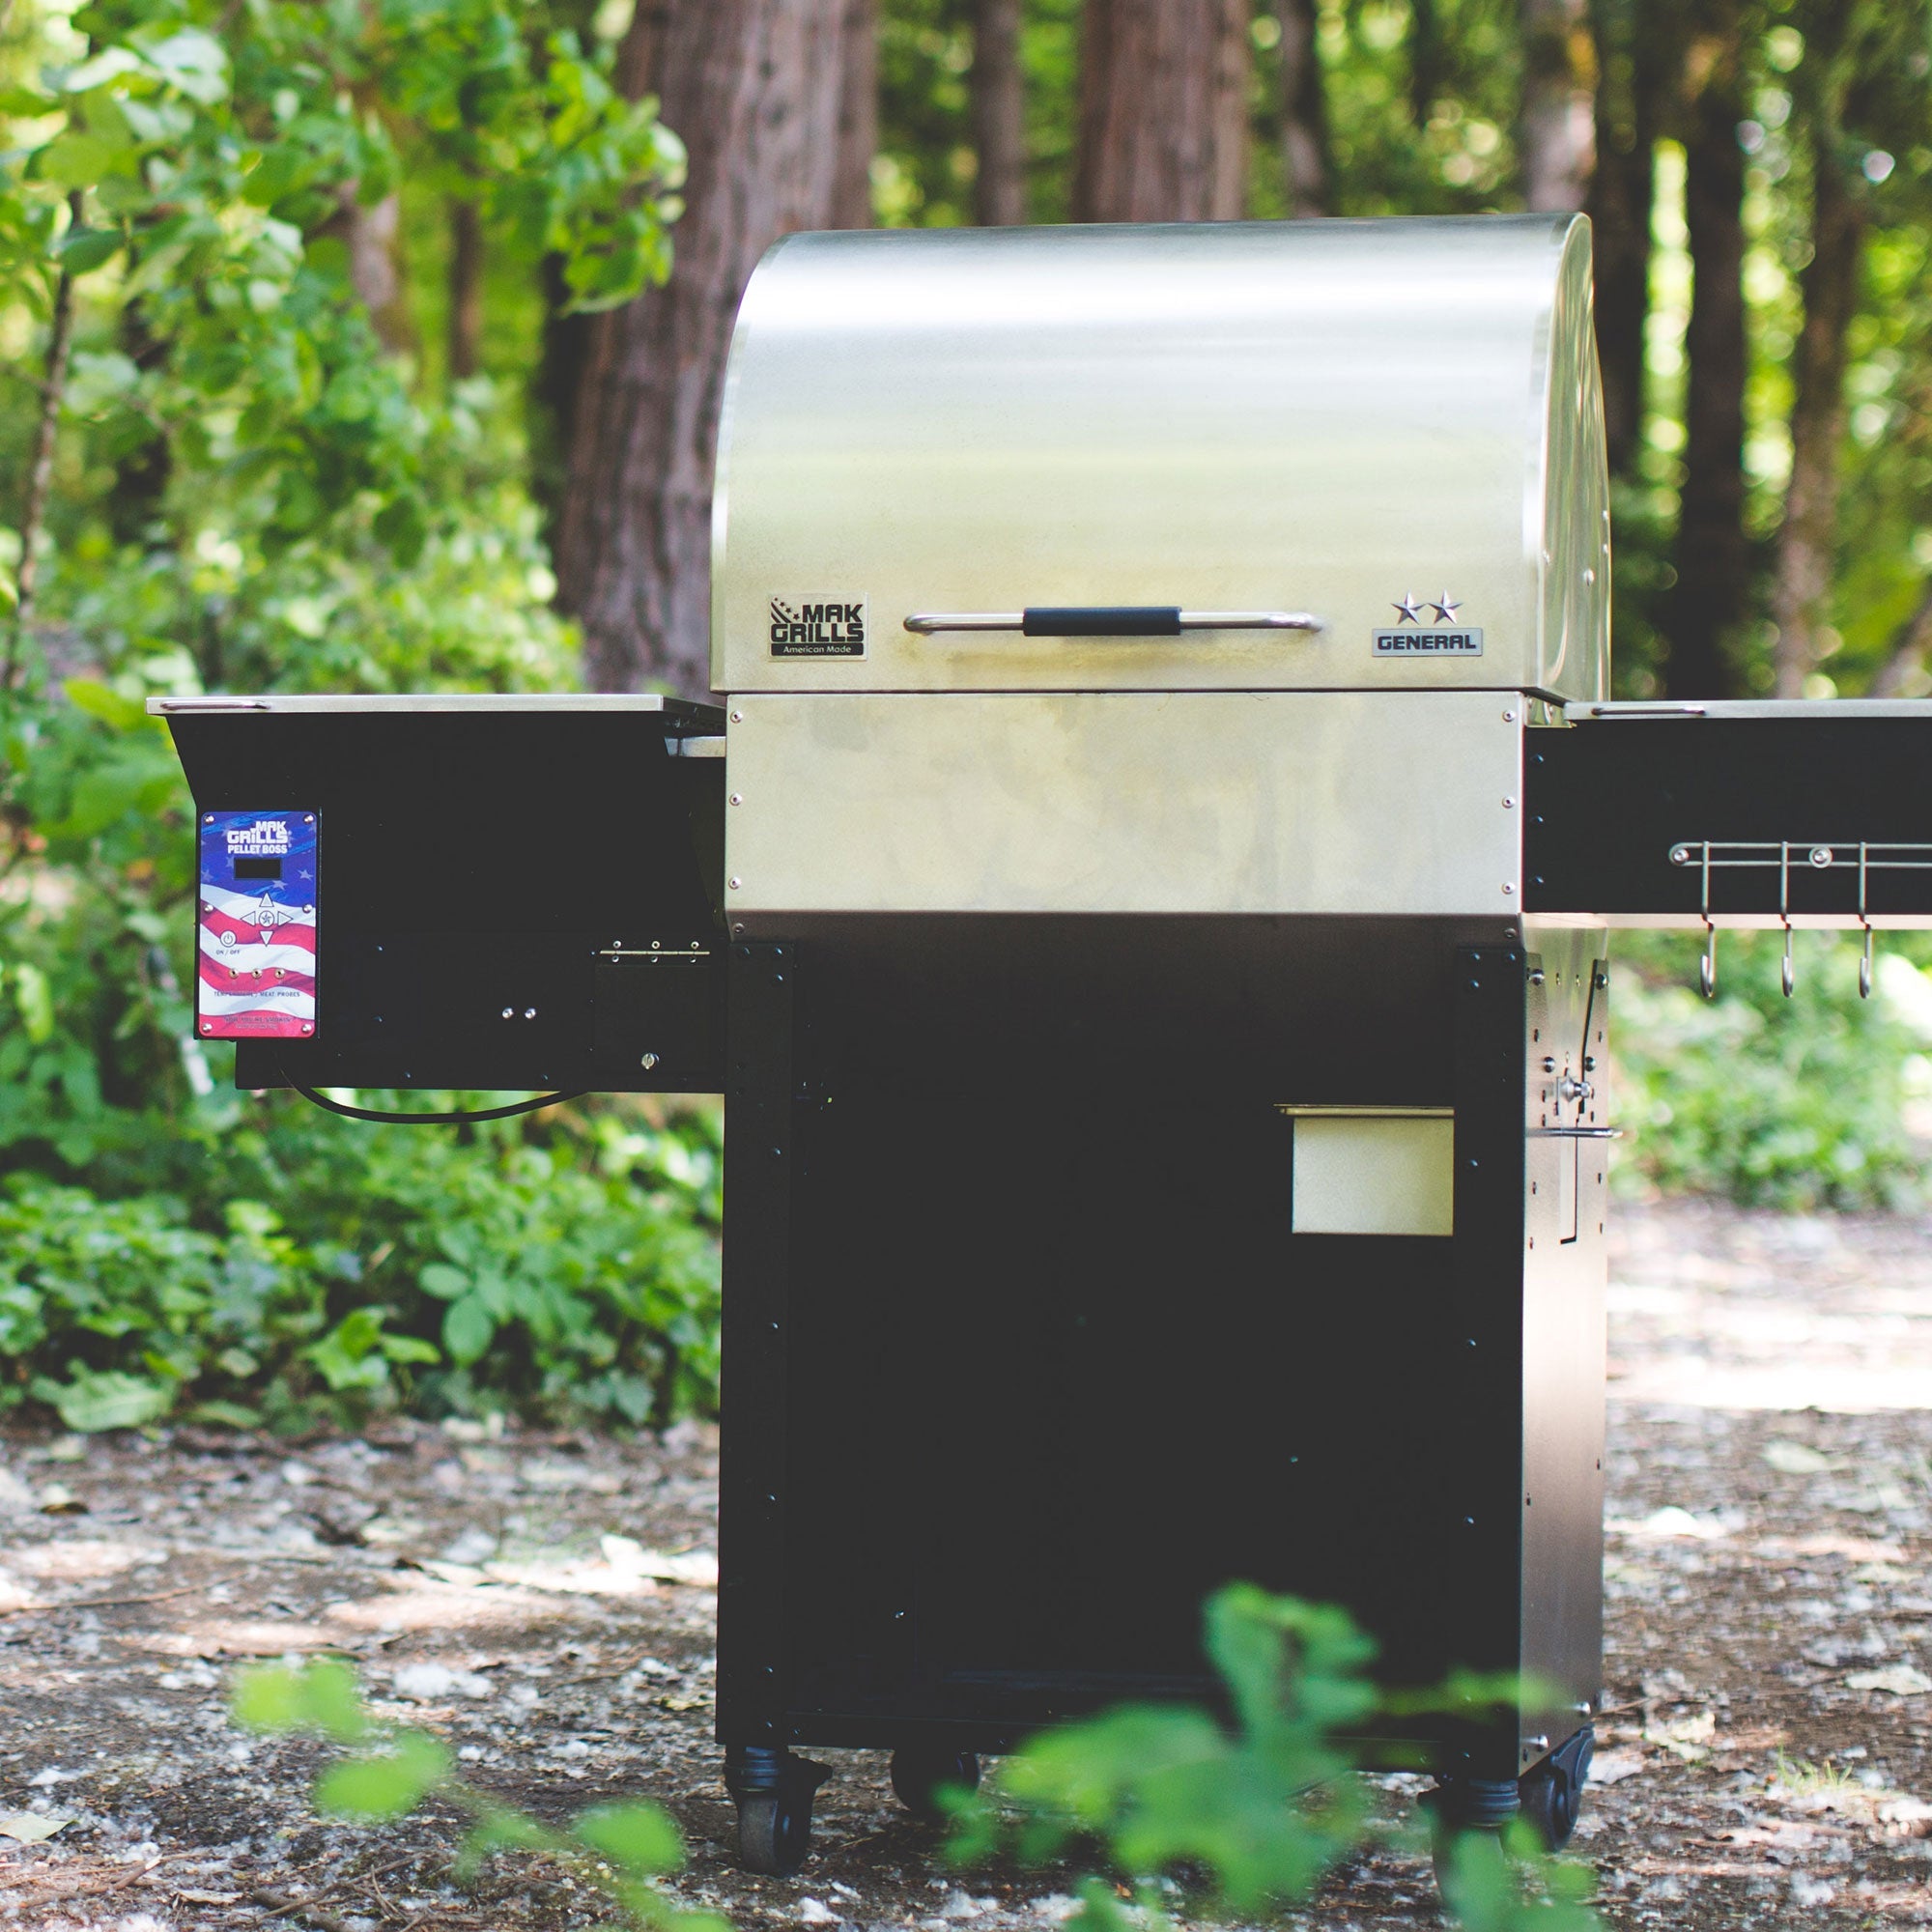 MAK 2 Star Grill is made in the USA.